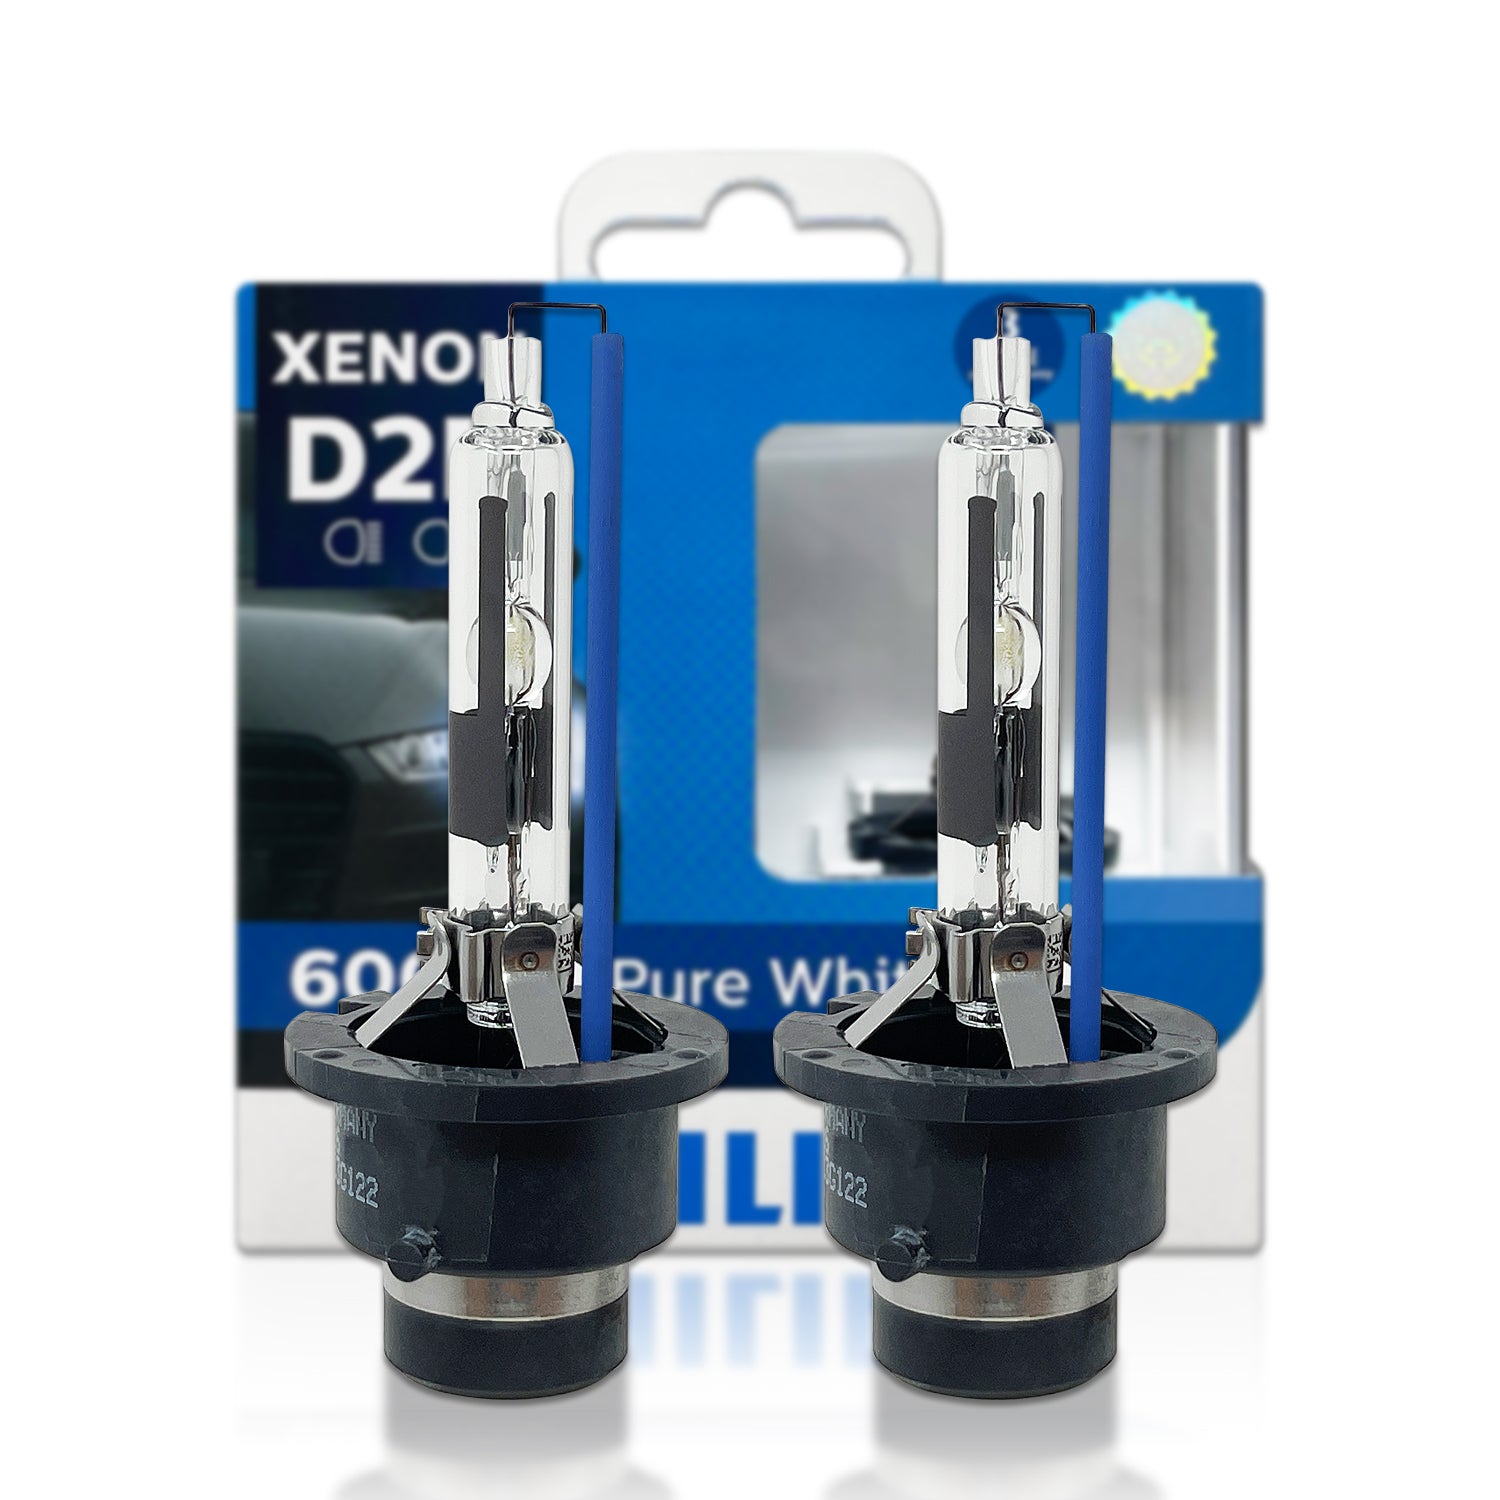 DAMA D2S/D2R HID Xenon Bulb to H7 Retainer Adapters | Pack of 2